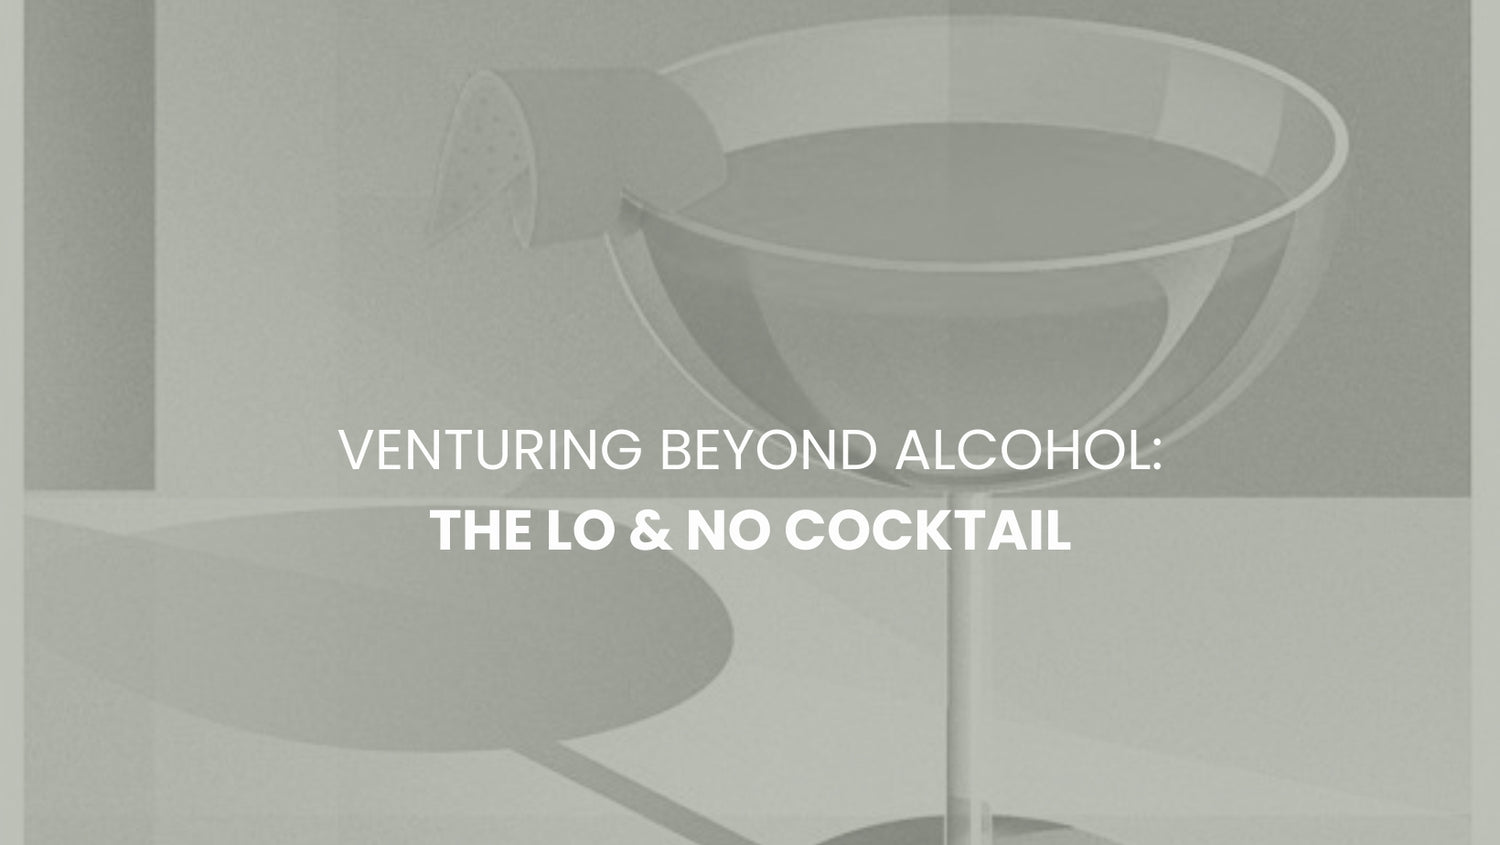 Venturing Beyond Alcohol: the Lo & No Cocktail